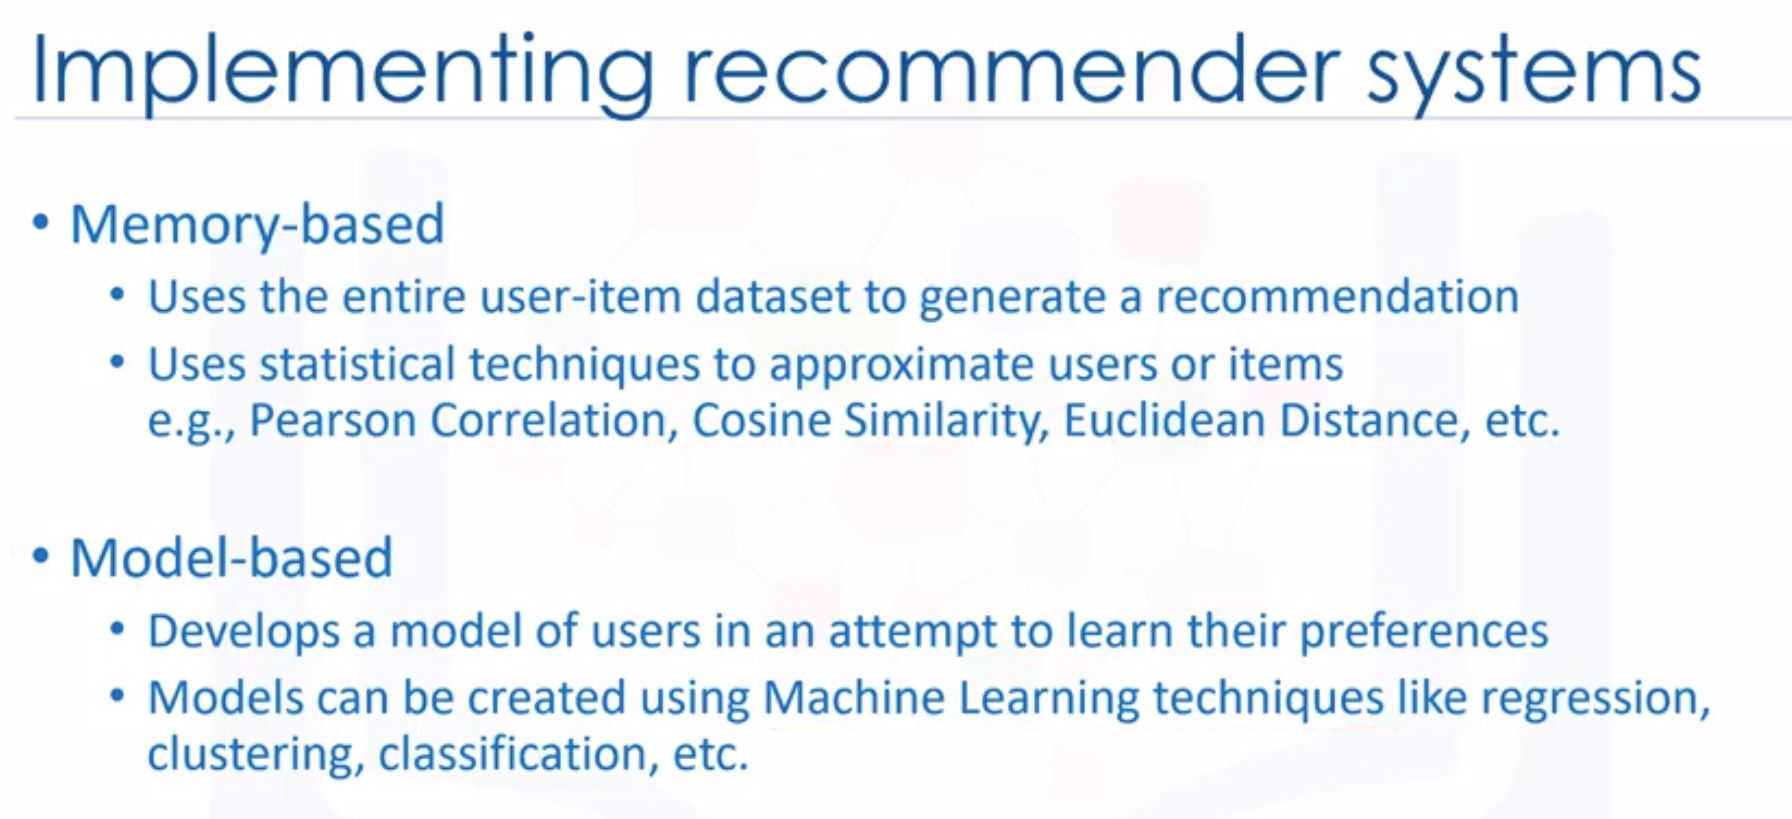 Implementing recommender systems